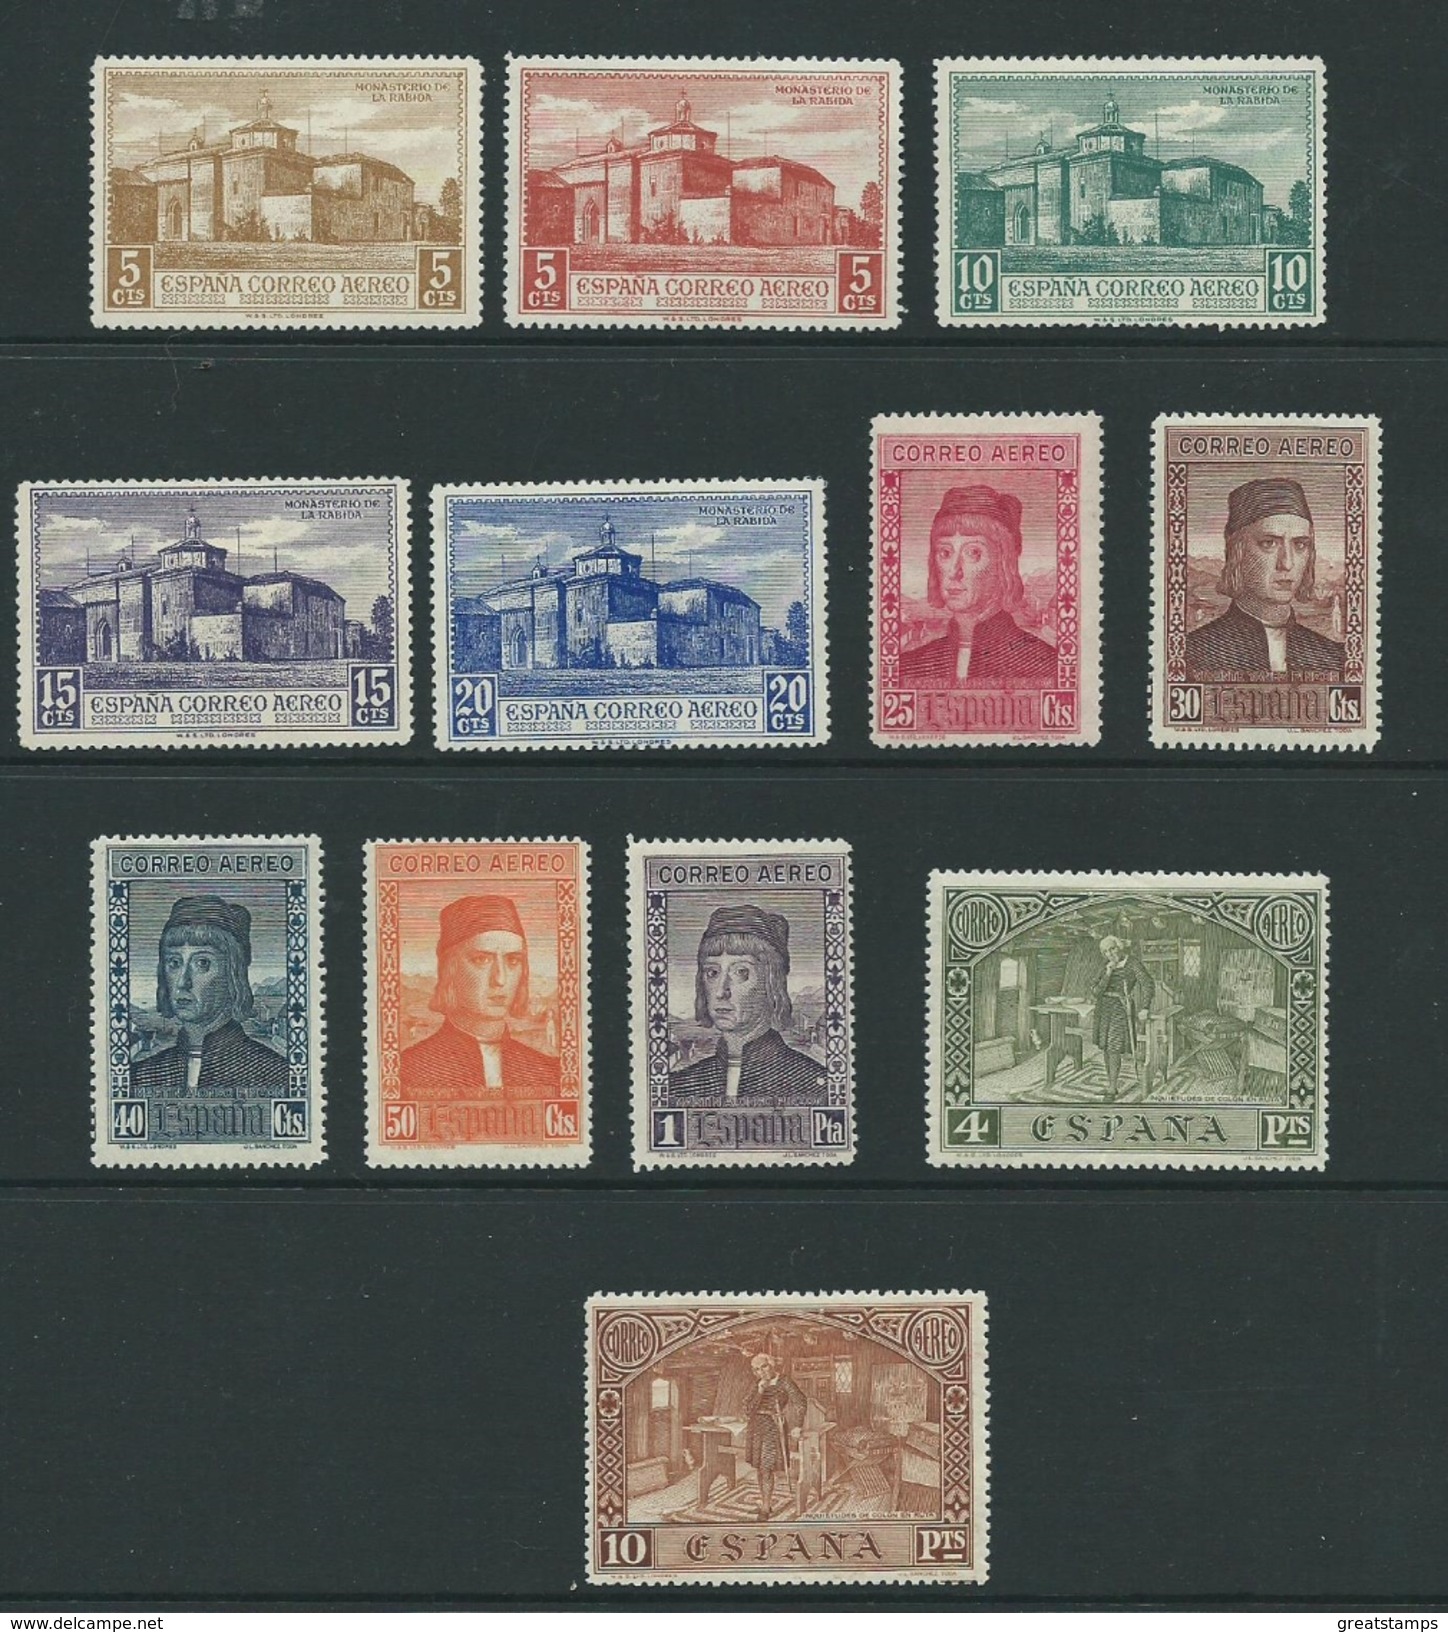 Spain Stamps Mh Columbus Air Set Sg608 /619 Europe And Africa Hinged - Nuevos